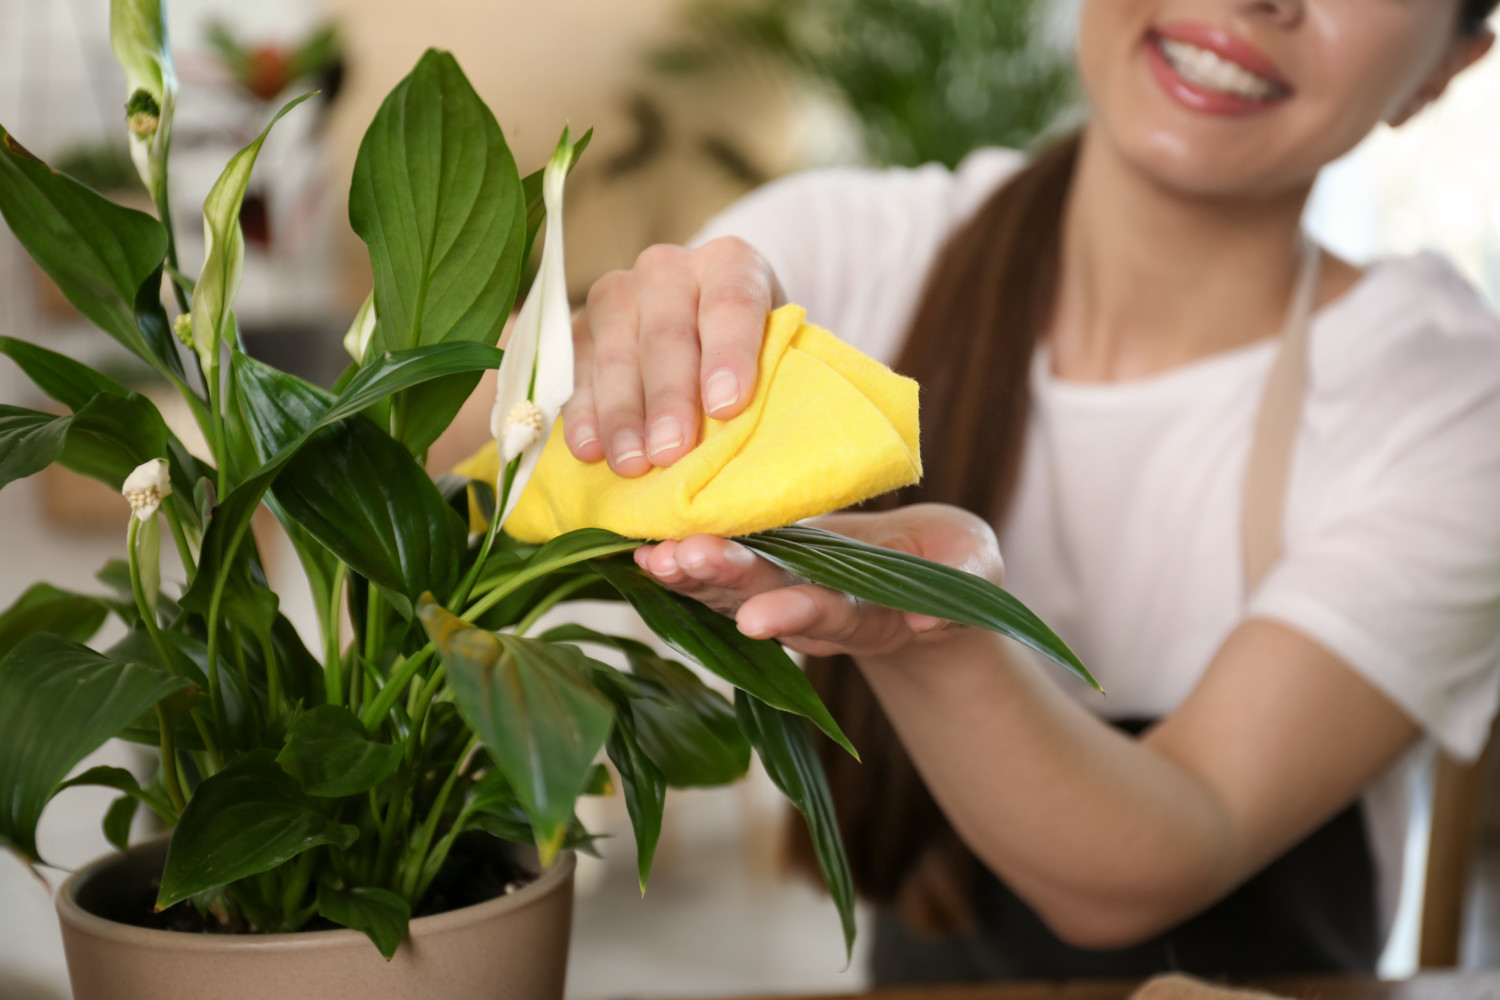 How To Clean Plant Leaves - Simplemost